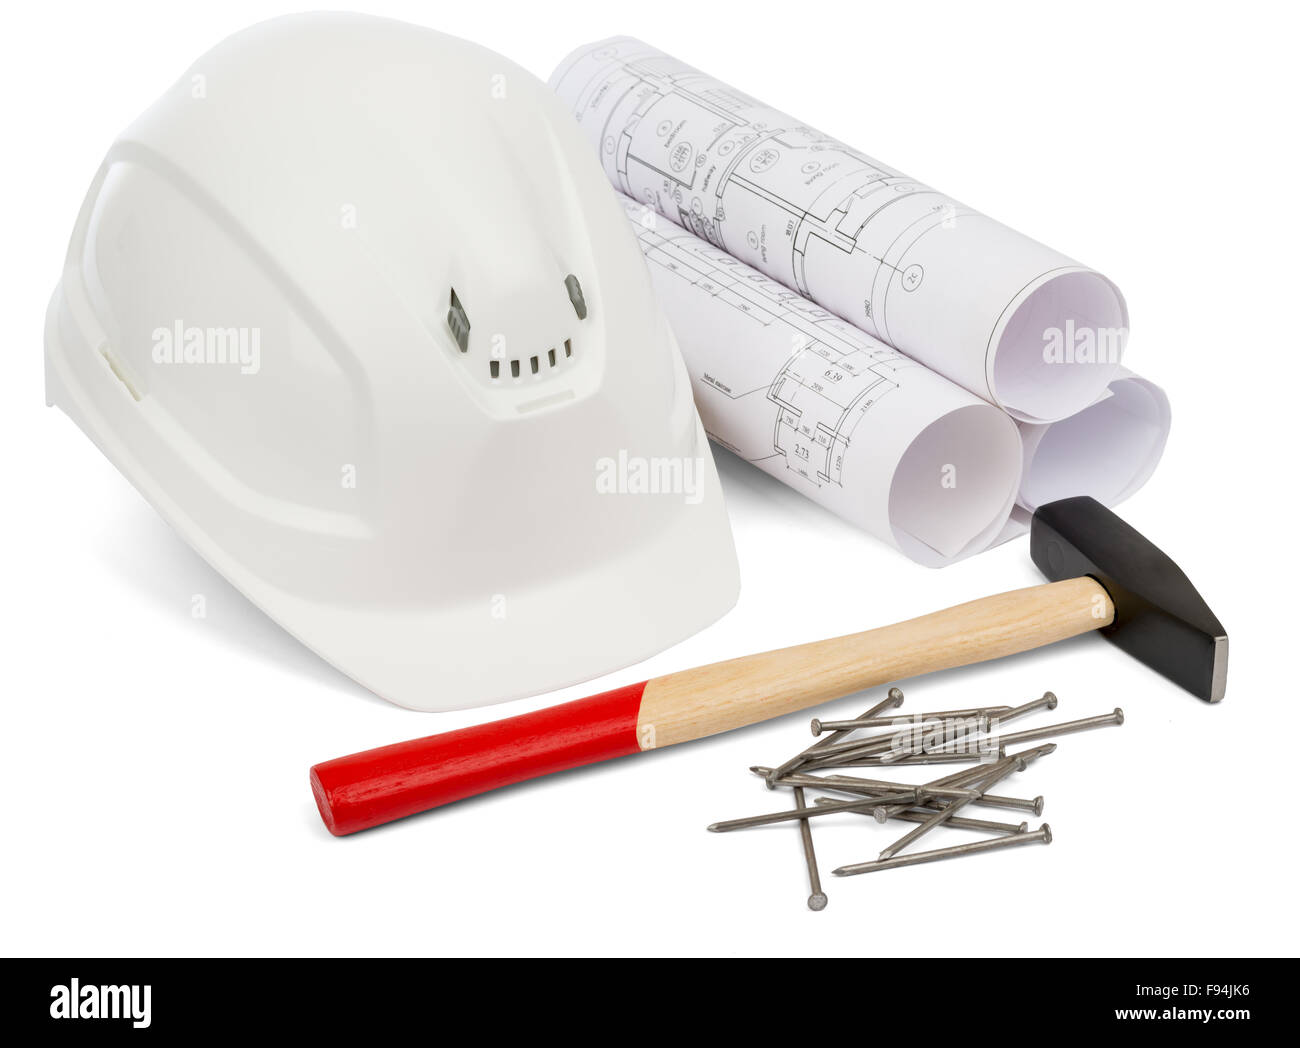 Claw hammer and rolled blueprints Stock Photo